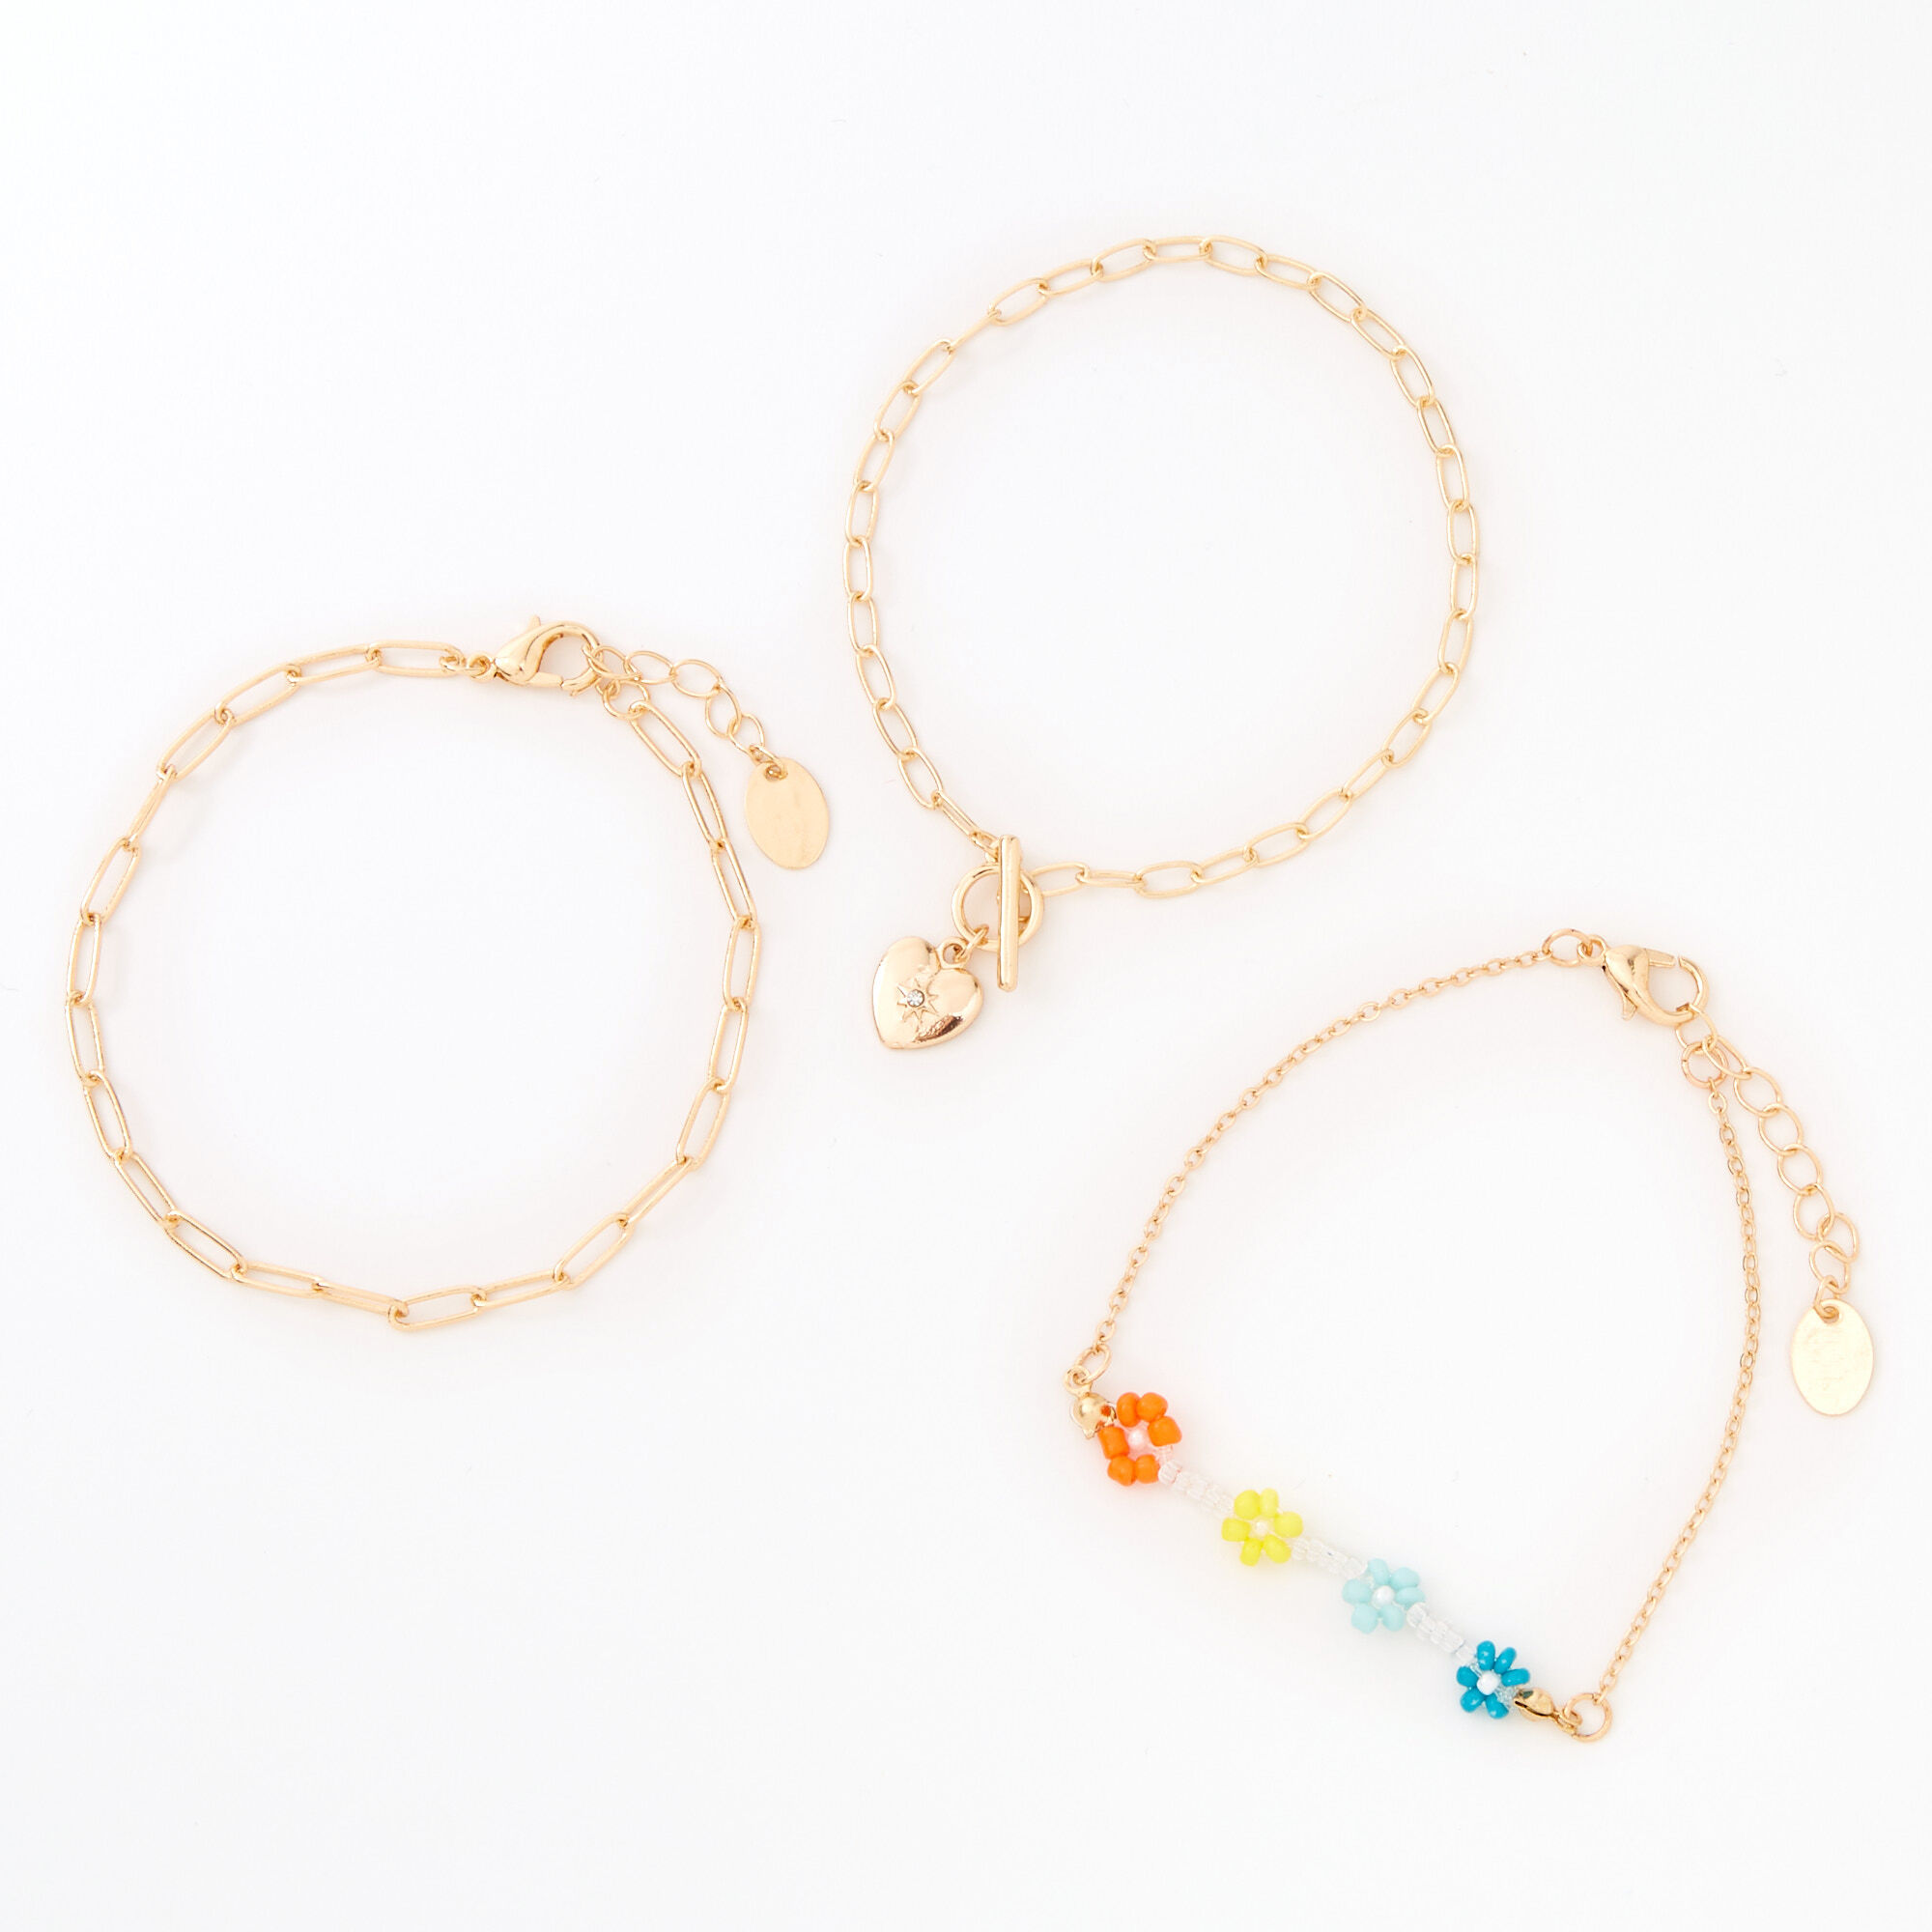 View Claires Beaded Daisy Chain Bracelet Set 3 Pack Gold information